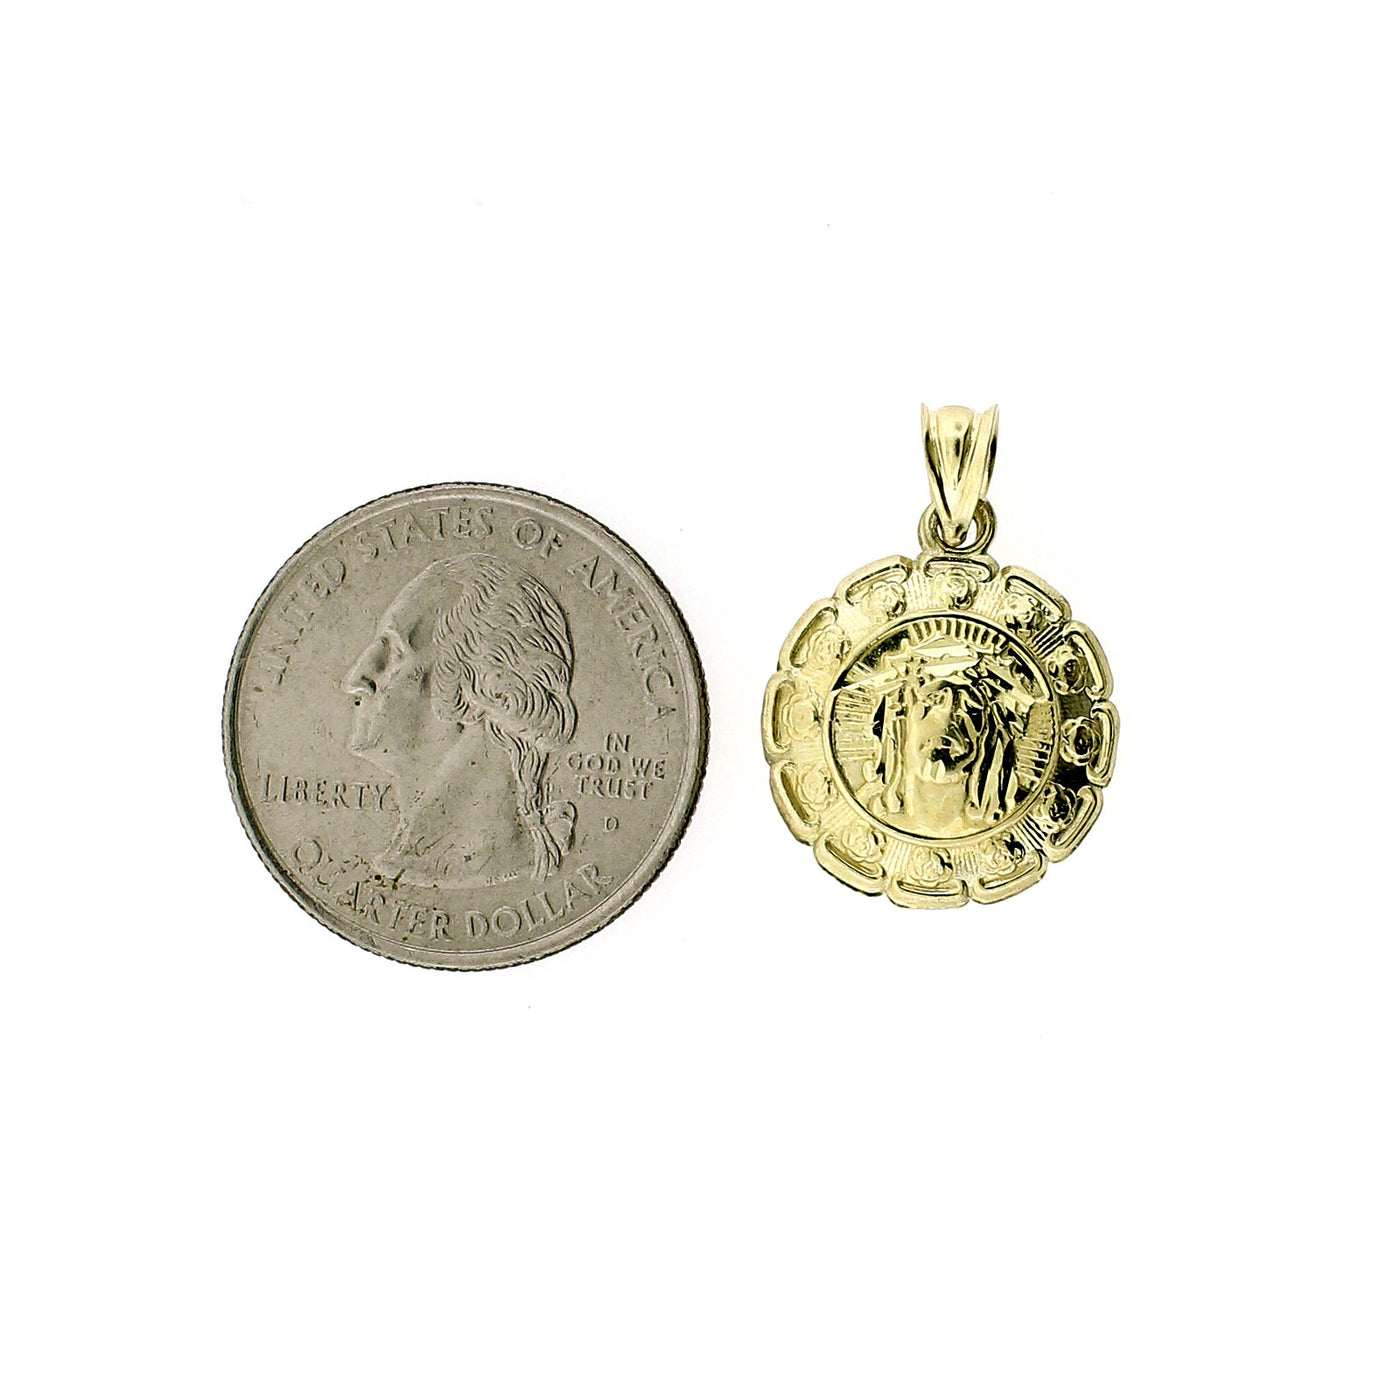 Real 10K Yellow Gold Jesus & Mary Medallion Pendant, 10KT Double Sided Charm